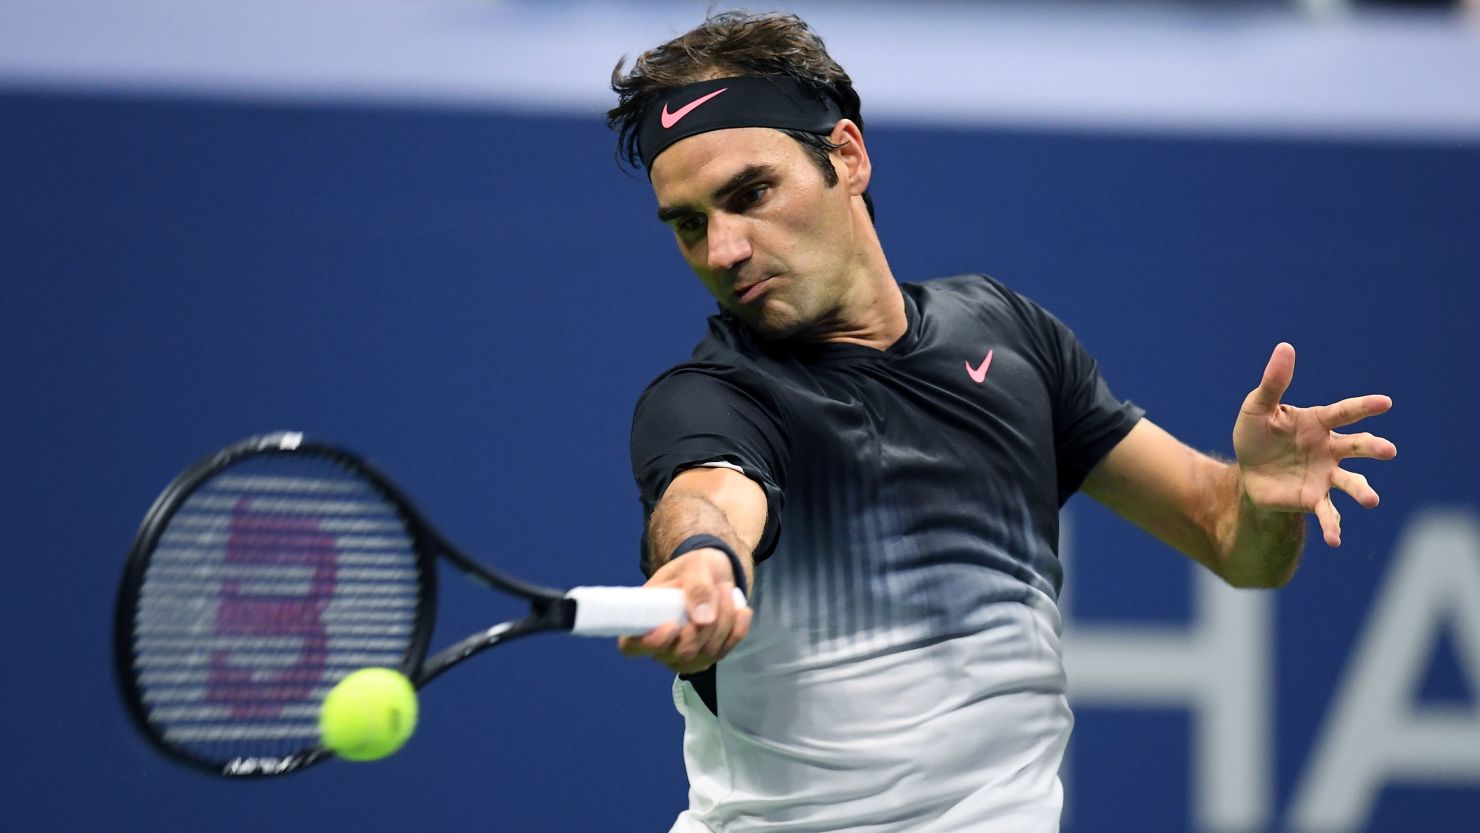 Switzerland's Roger Federer returns the ball to Frances Tiafoe of the US during their 2017 US Open men's singles match.